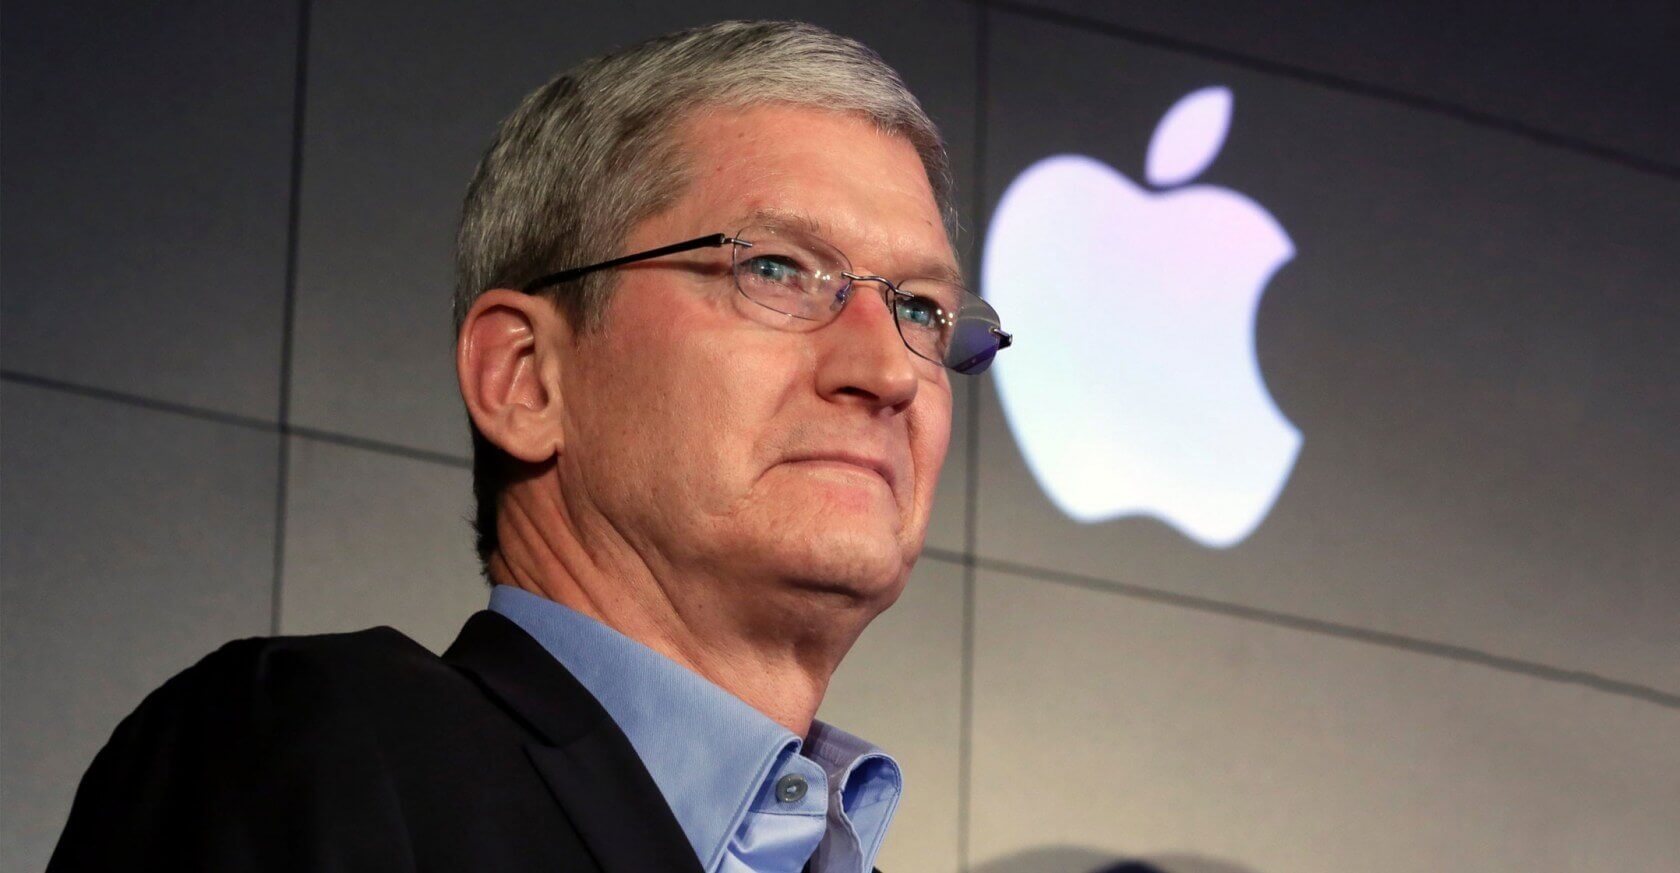 Tim Cook: The 'time is now' to have 'rigorous' federal privacy regulation